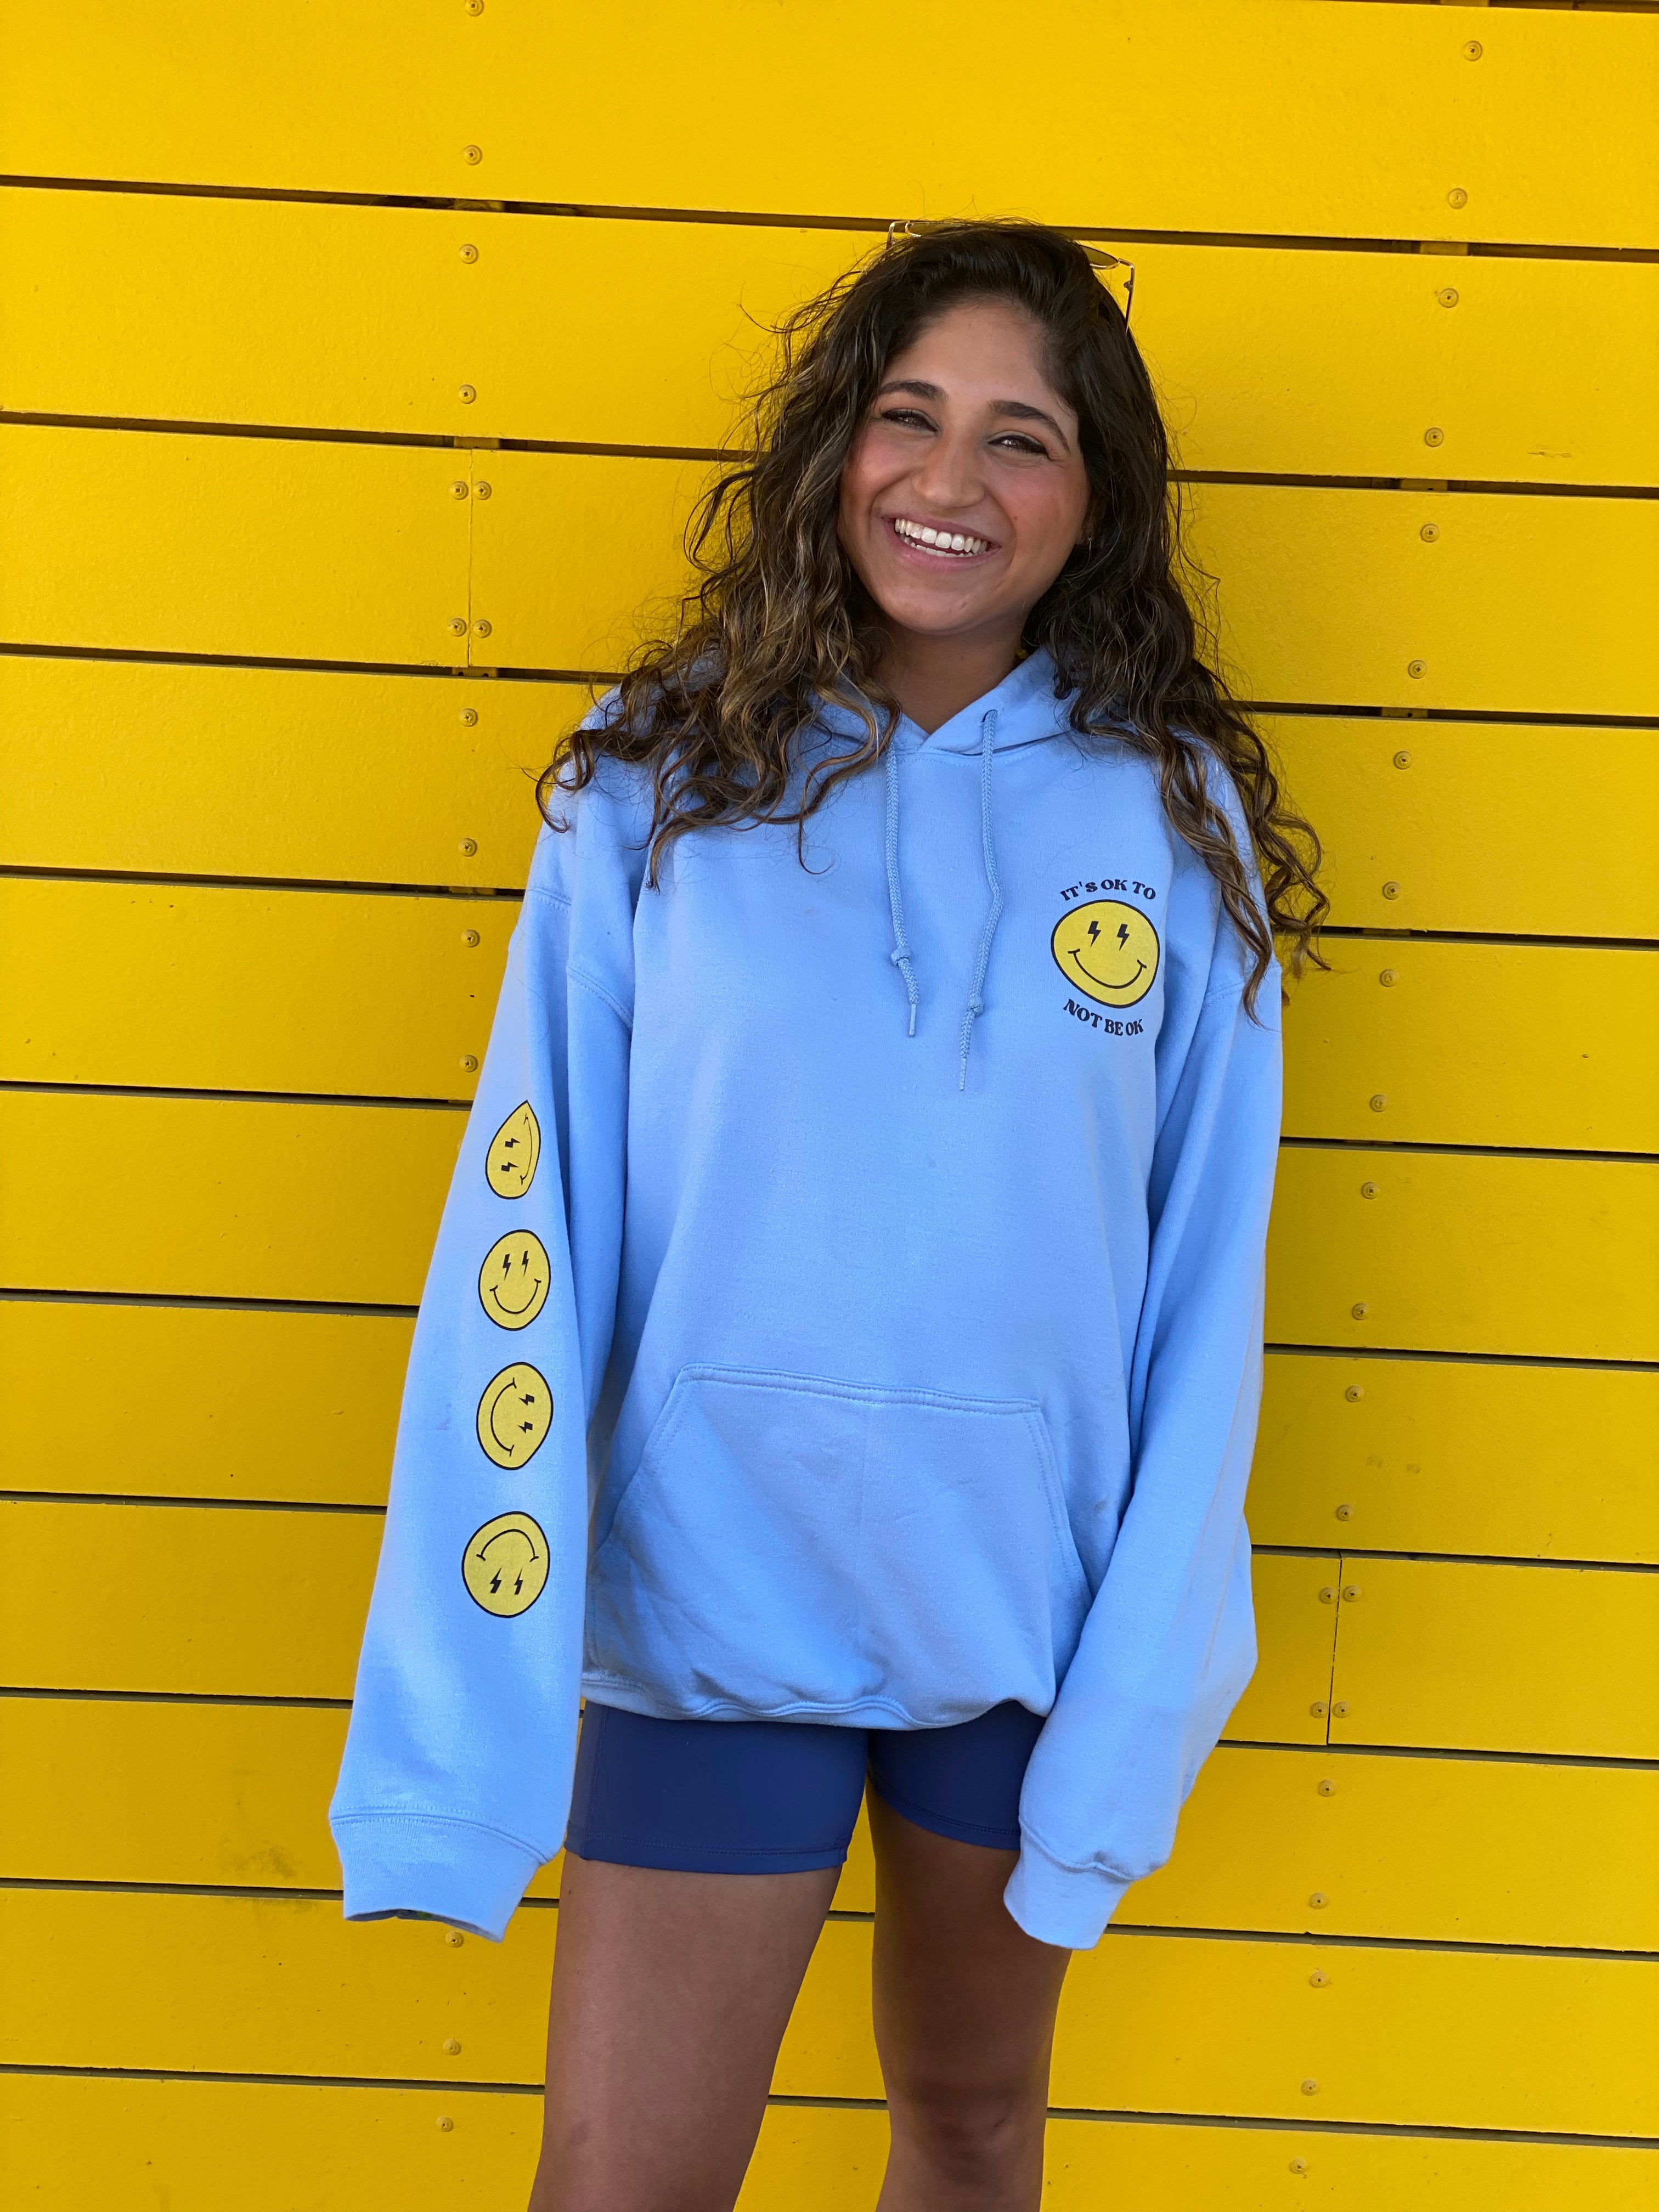 It's Ok Not To Be Ok Smiley Hoodie - Color